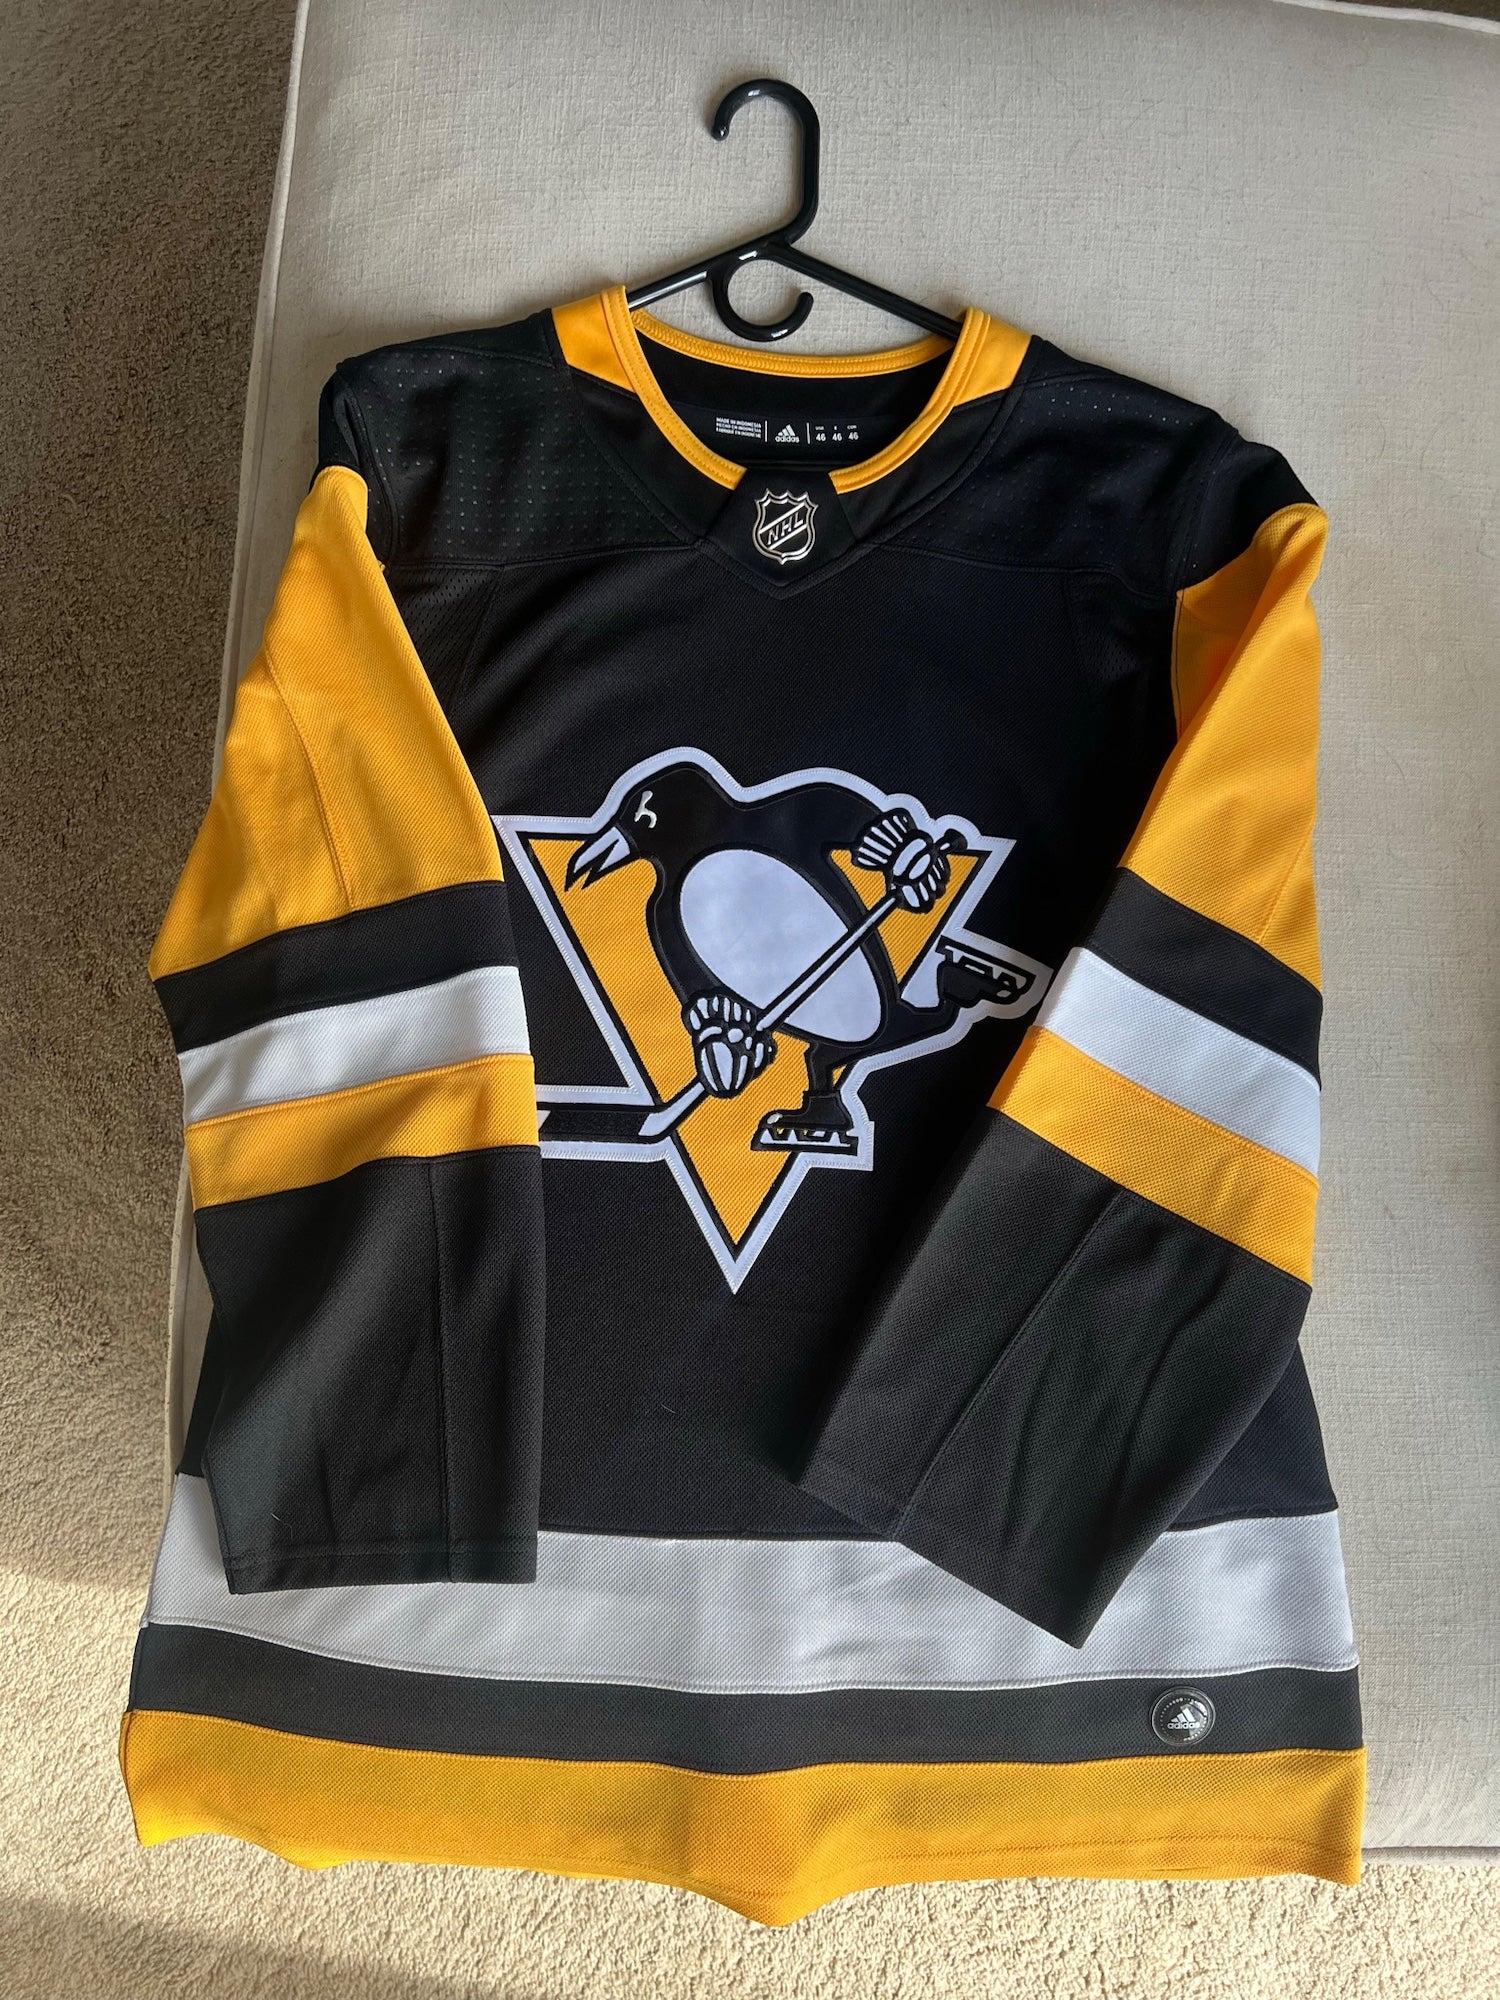 penguins home jersey